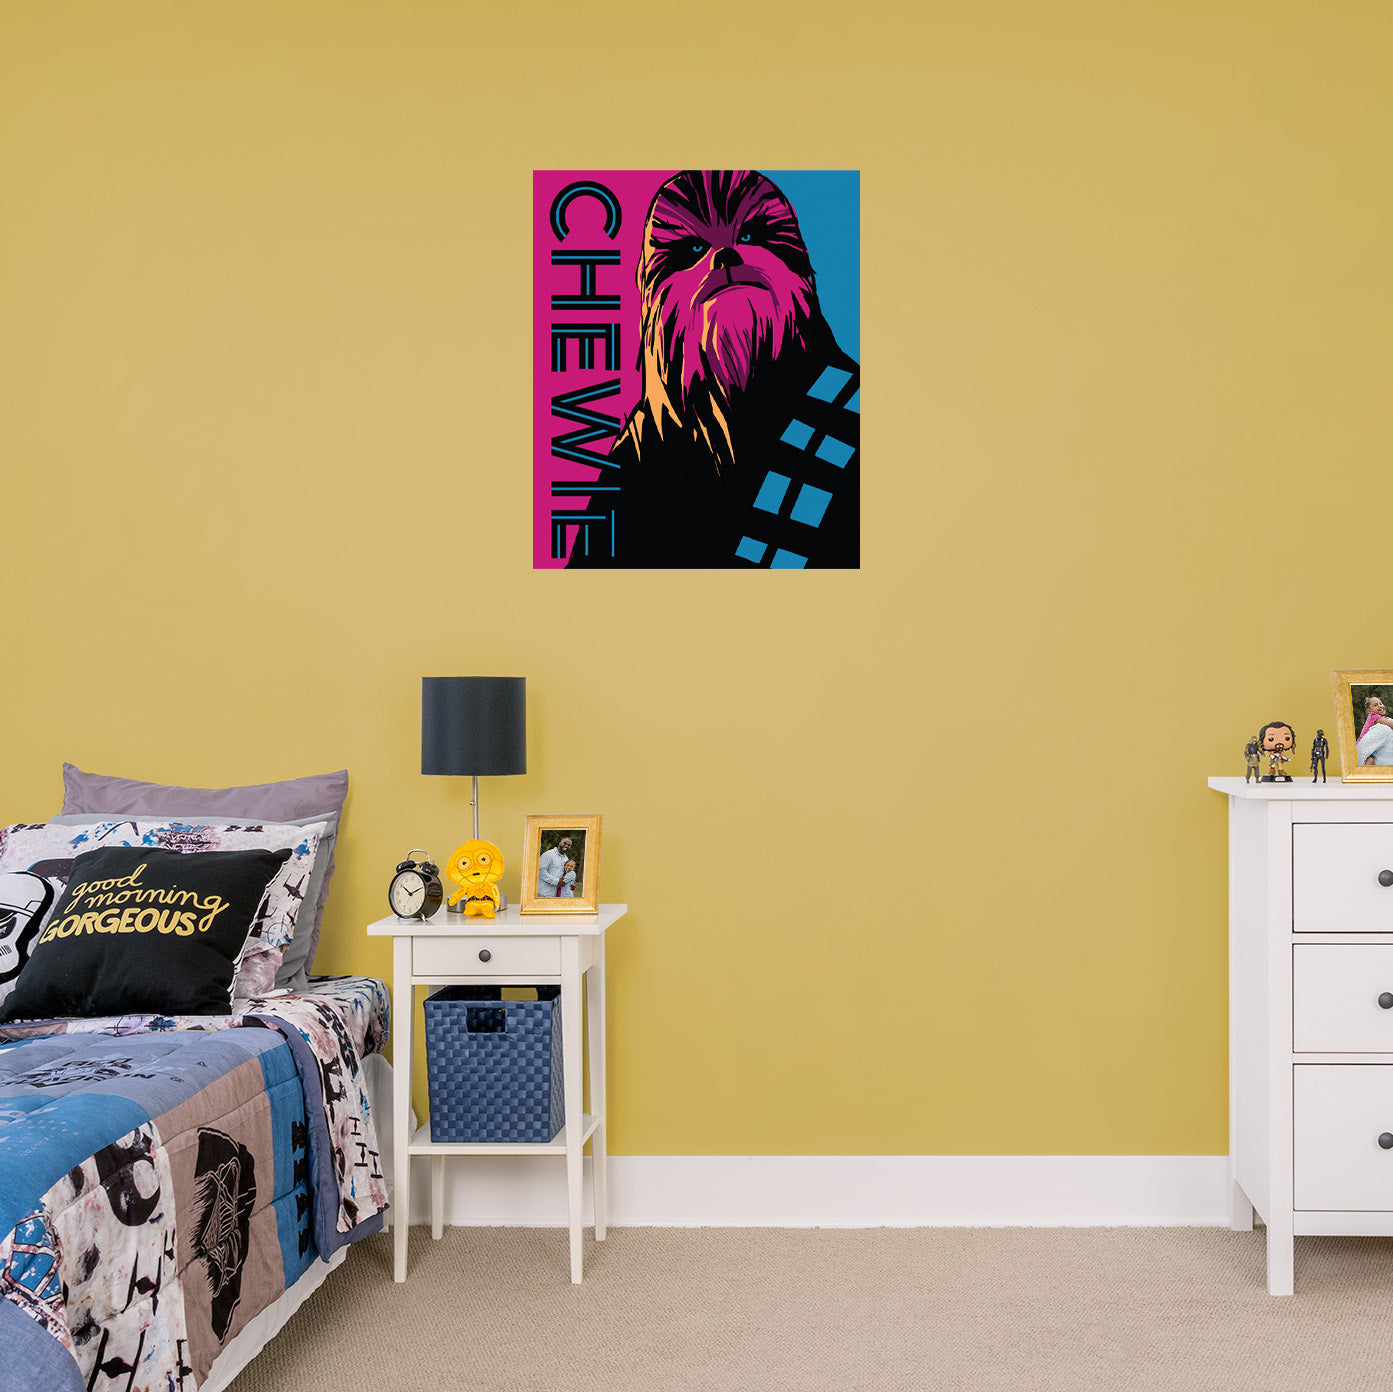 Chewbacca CHEWIE Pop Art Poster - Officially Licensed Star Wars Removable Adhesive Decal